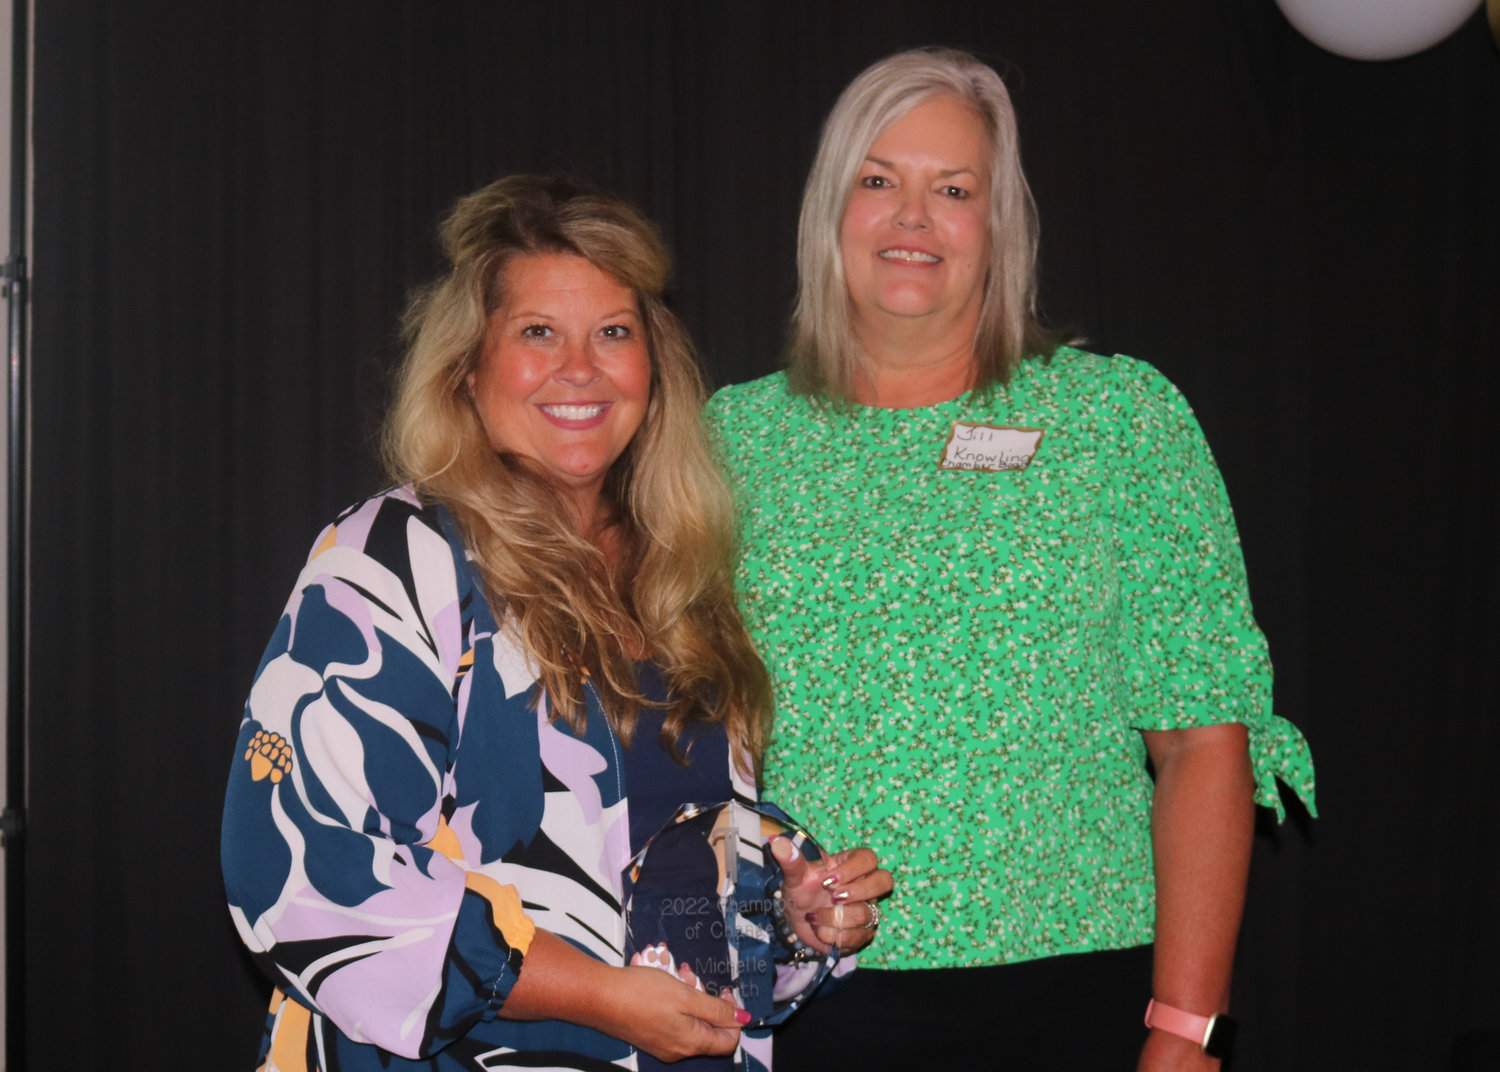 Michelle Smith, left, of Abilities Services Inc. was named the Champion of Change. She is pictured with Jill Knowling.